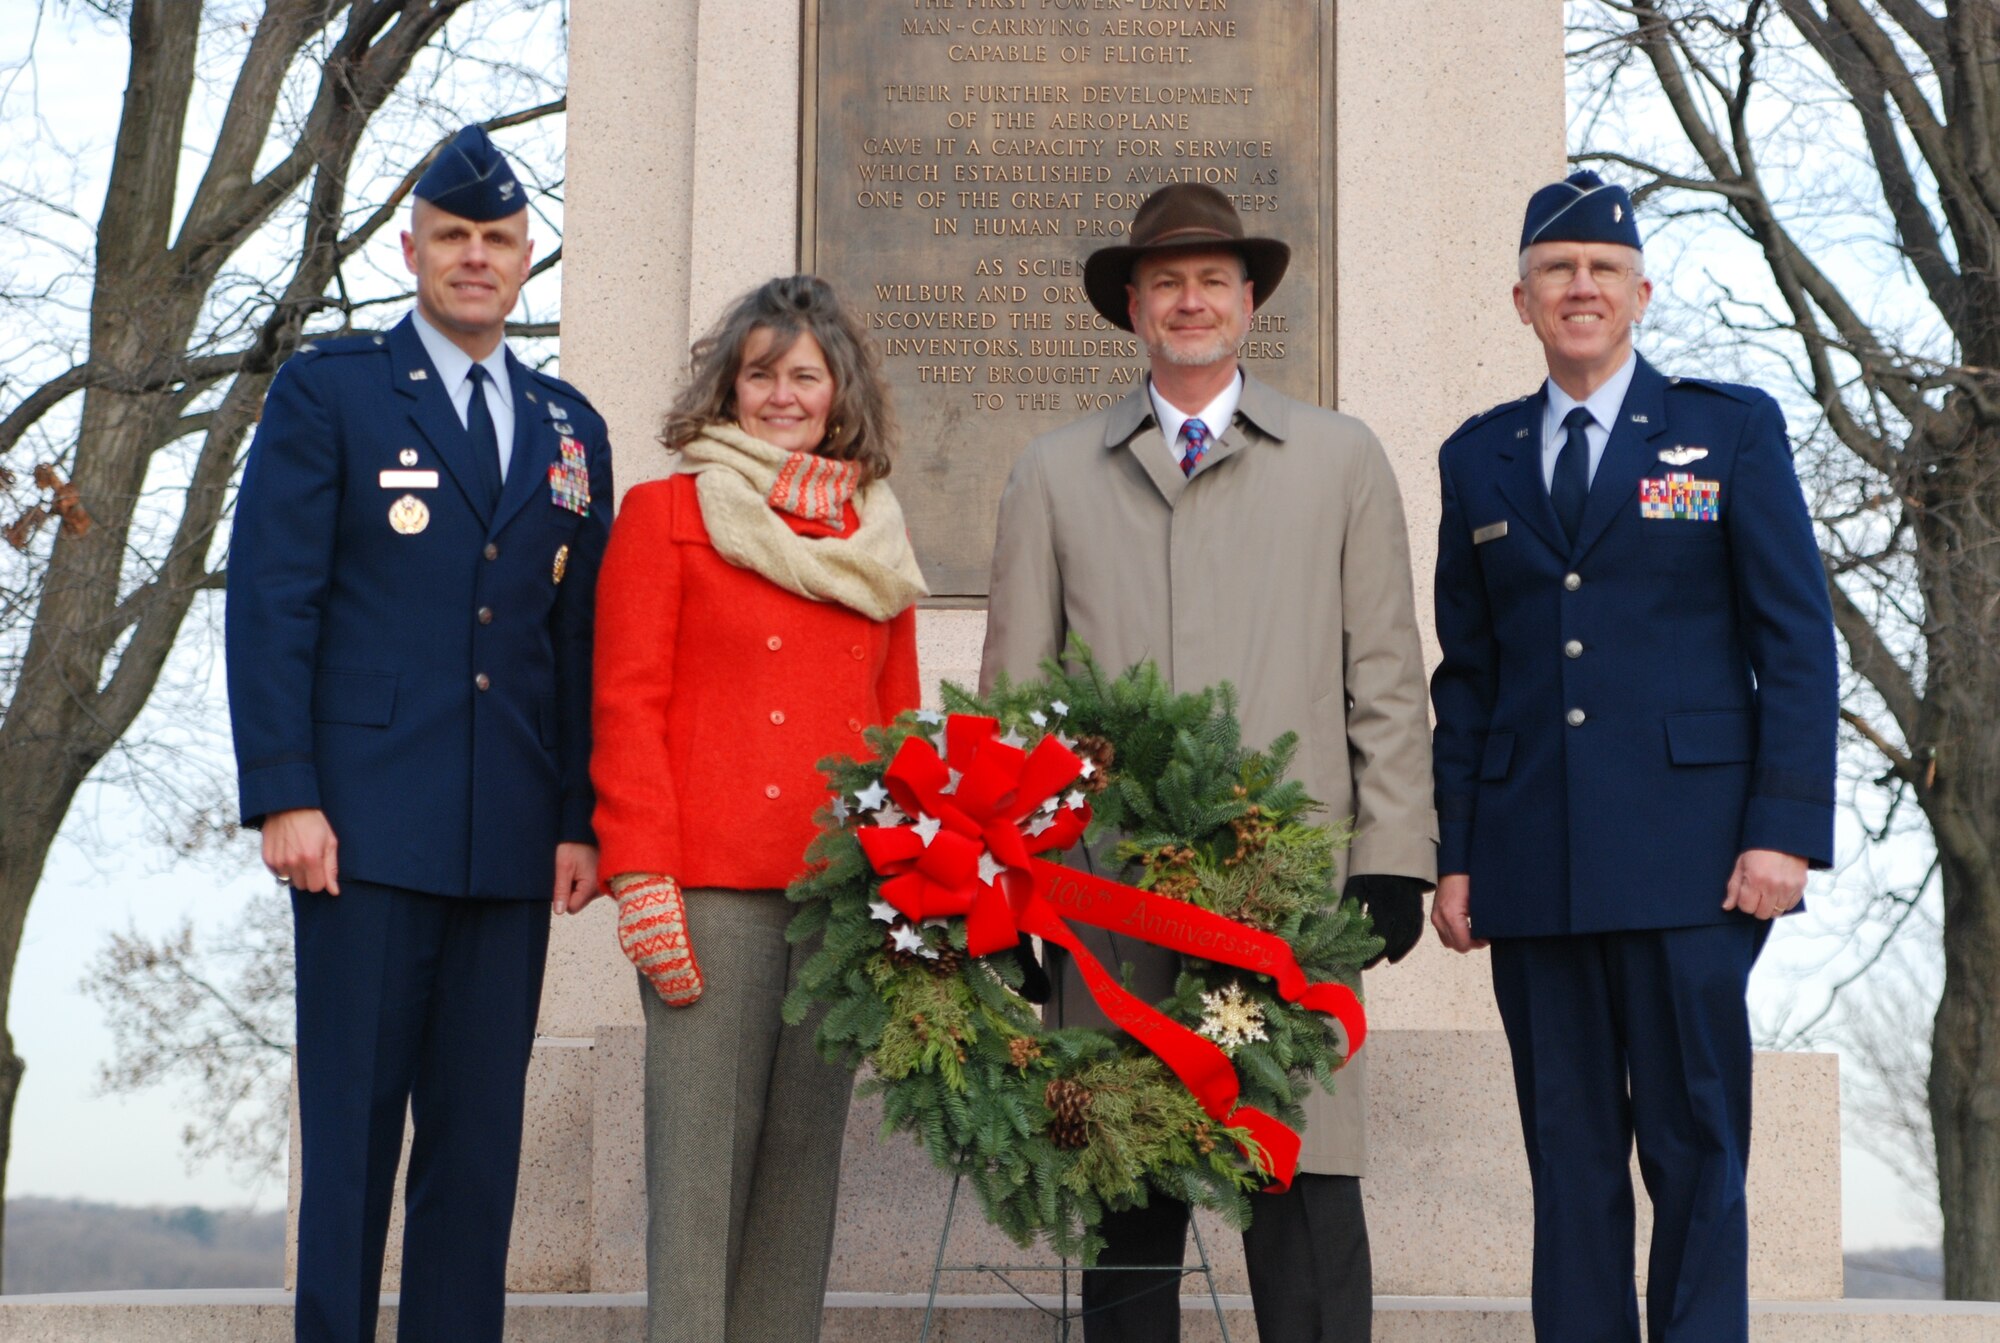 Members of the Wright Family and Wright-Patterson Air Force Base placed a wreath at the Wright Brothers Memorial Dec. 17, 2009 during a ceremony marking the 106th anniversary of the Wright Brothers' first powered flight. Amanda Wright Lane, great grand-niece of the brothers and Stephen Wright, great grand-nephew, pose with Col. Brad Spacy (l) and Brig. Gen. Paul Sampson (r).  Col. Spacy is 88th Air Base Wing commander, and Brig. Gen. Sampson is mobilization assistant to the commander of Aeronautical Systems Center. (U.S. Air Force photo/Bonnie White)